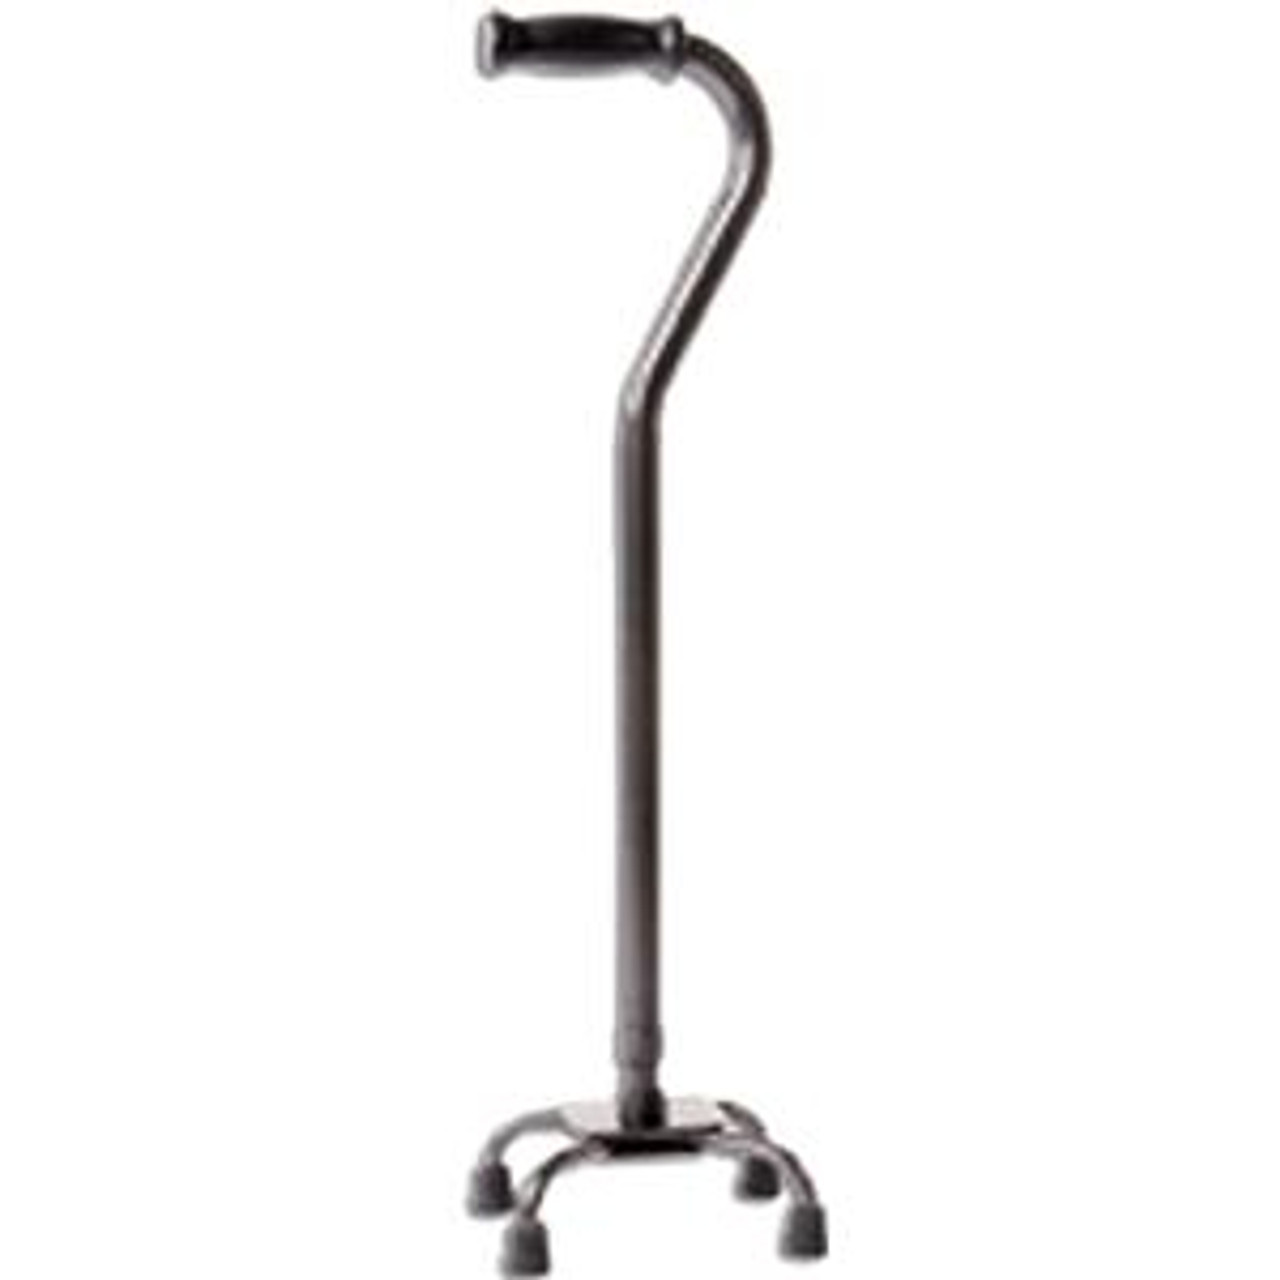 Days Steel Bariatric Adjustable Cane - Offset Handle for Extra Support